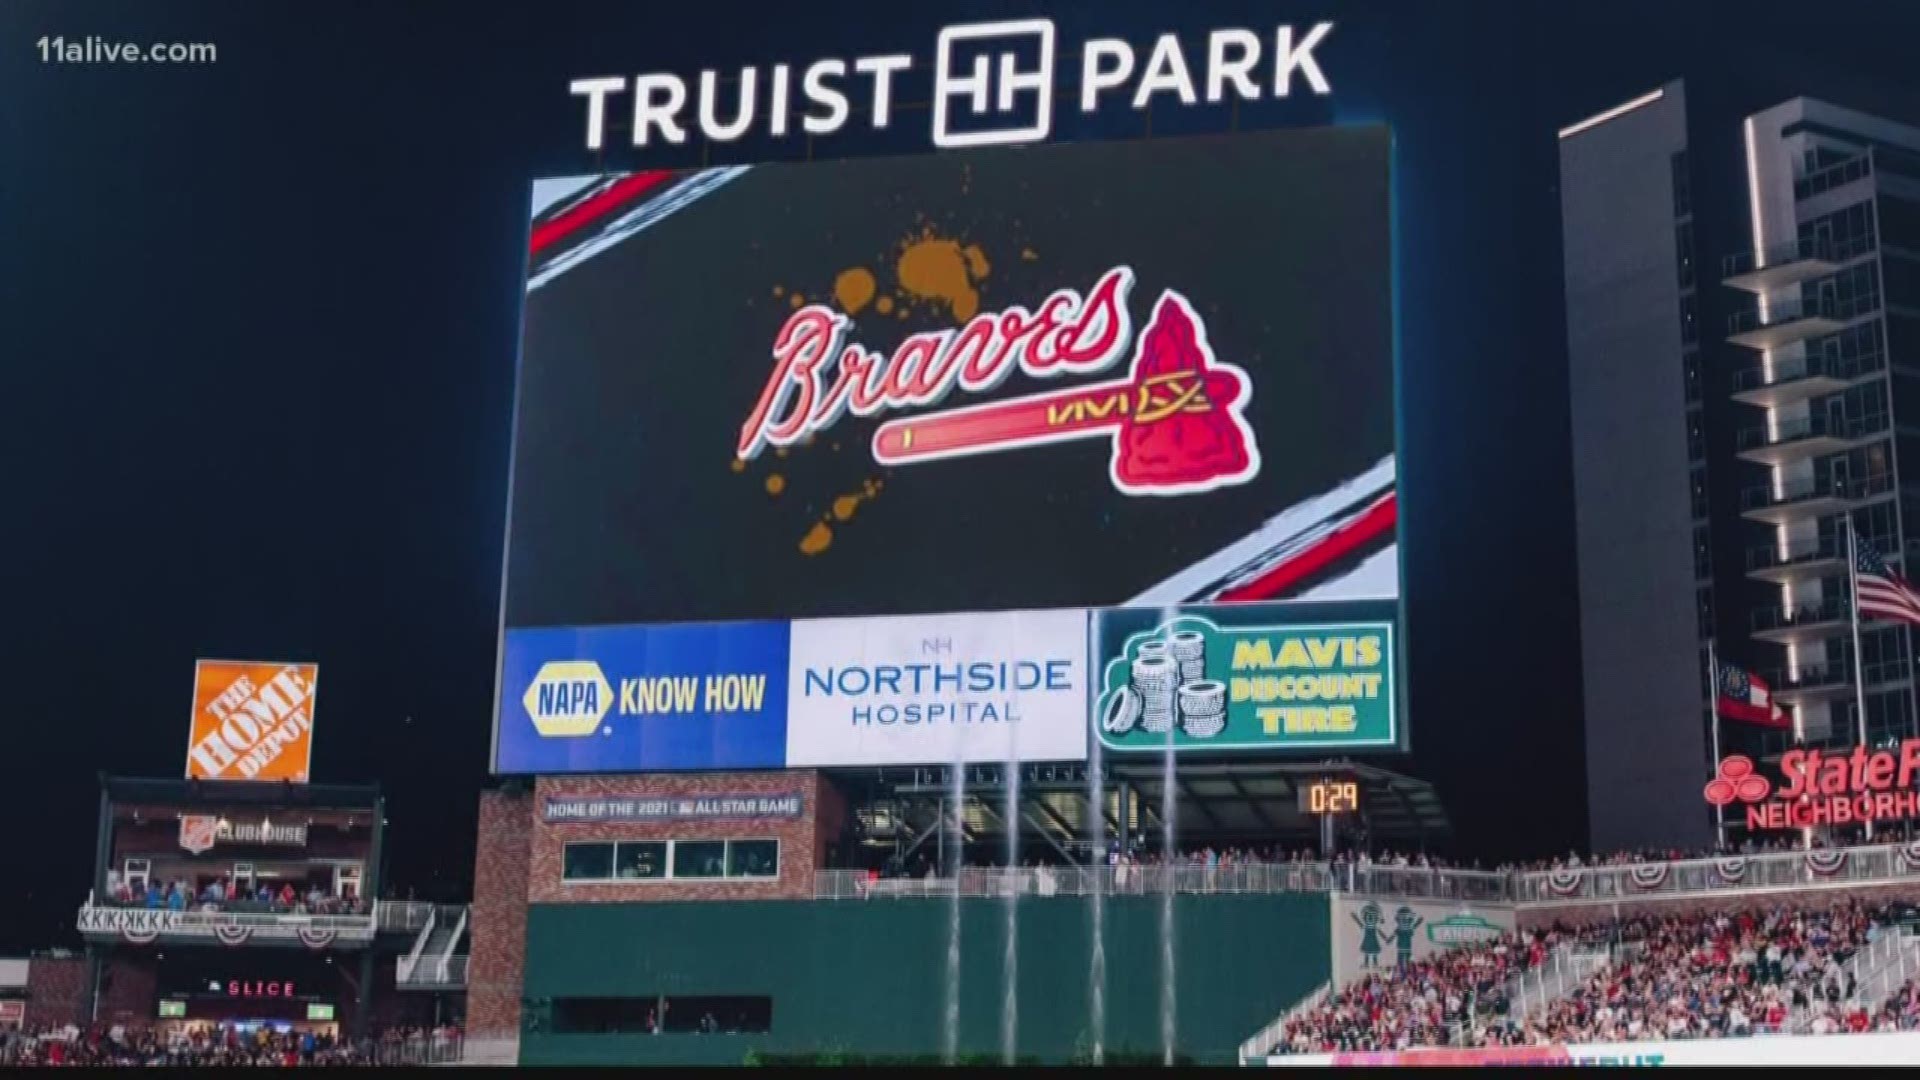 Where did the name Truist Park come from?